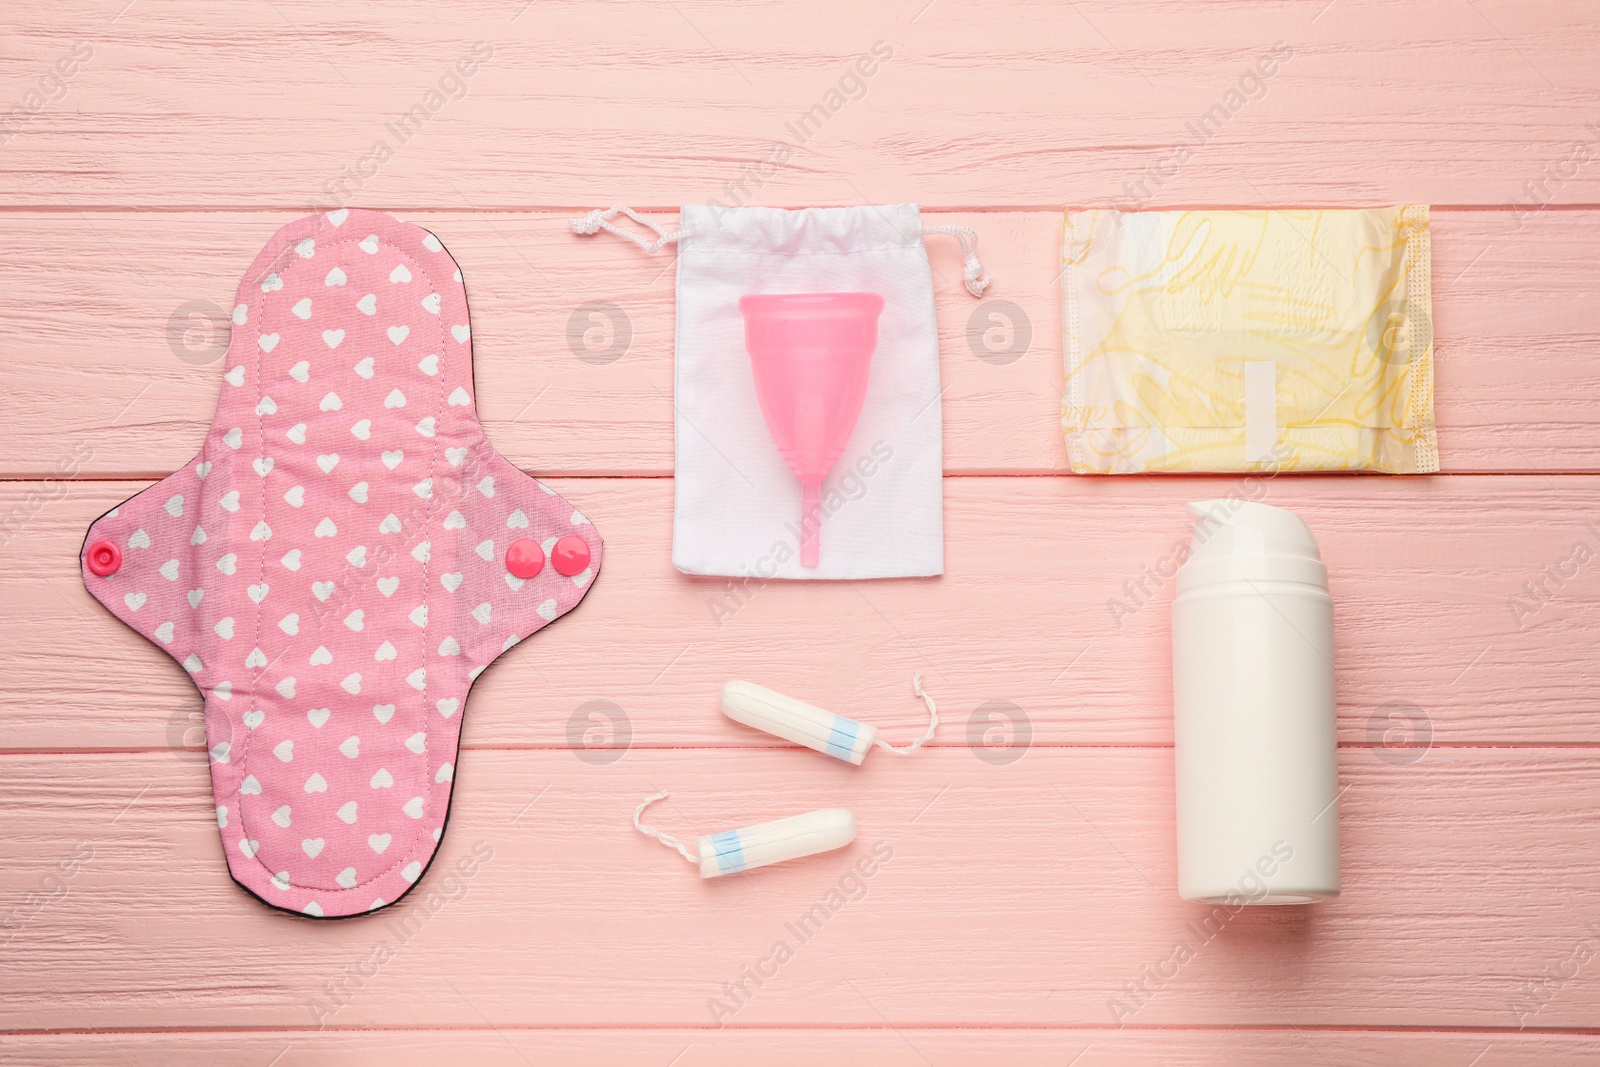 Photo of Cloth menstrual pad and other female hygiene products on pink wooden table, flat lay